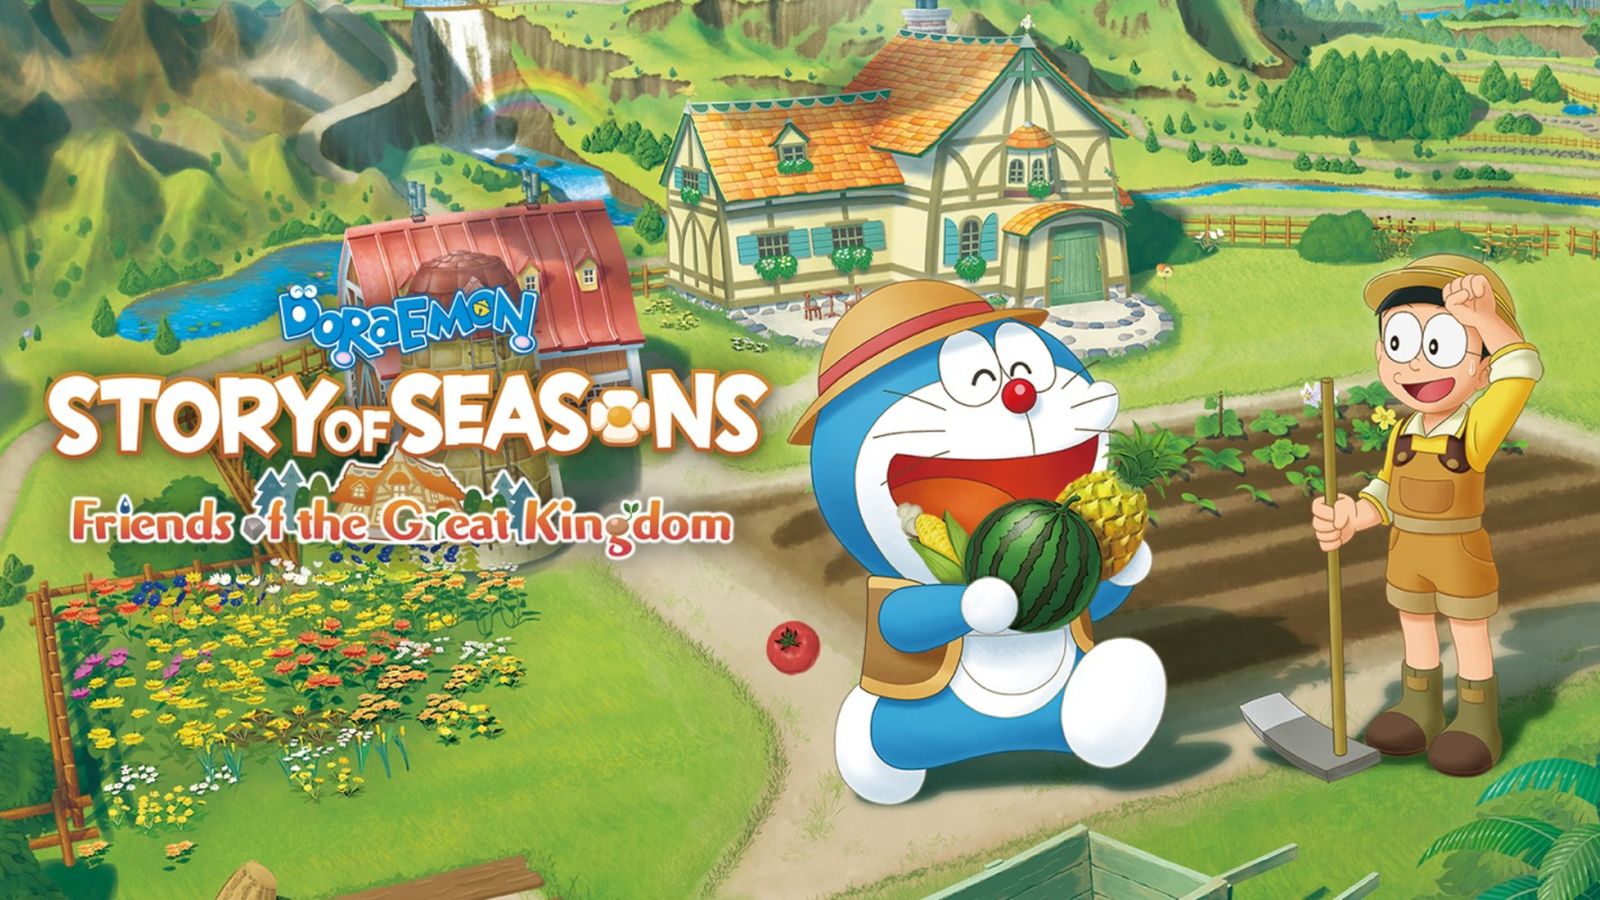 A farming scene with the Doraemon Story of Seasons logo on the left, while a blue and white cat character is on the right next to a boy.